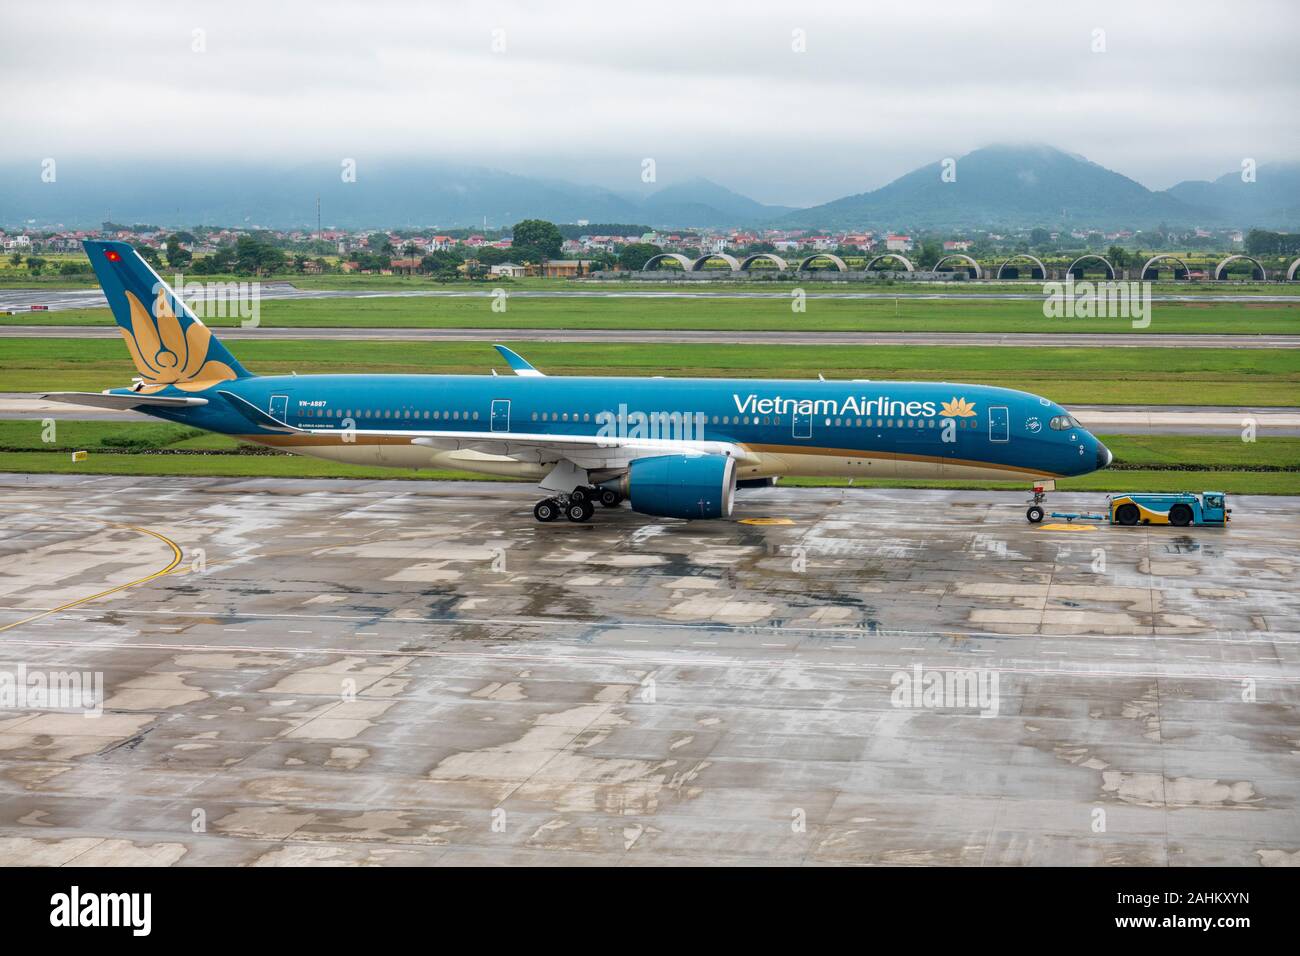 An Airbus A350-900 operated by Vietnam Airlines gets towed by a tug at Noi Bai International Airport, Hanoi, Vietnam Stock Photo